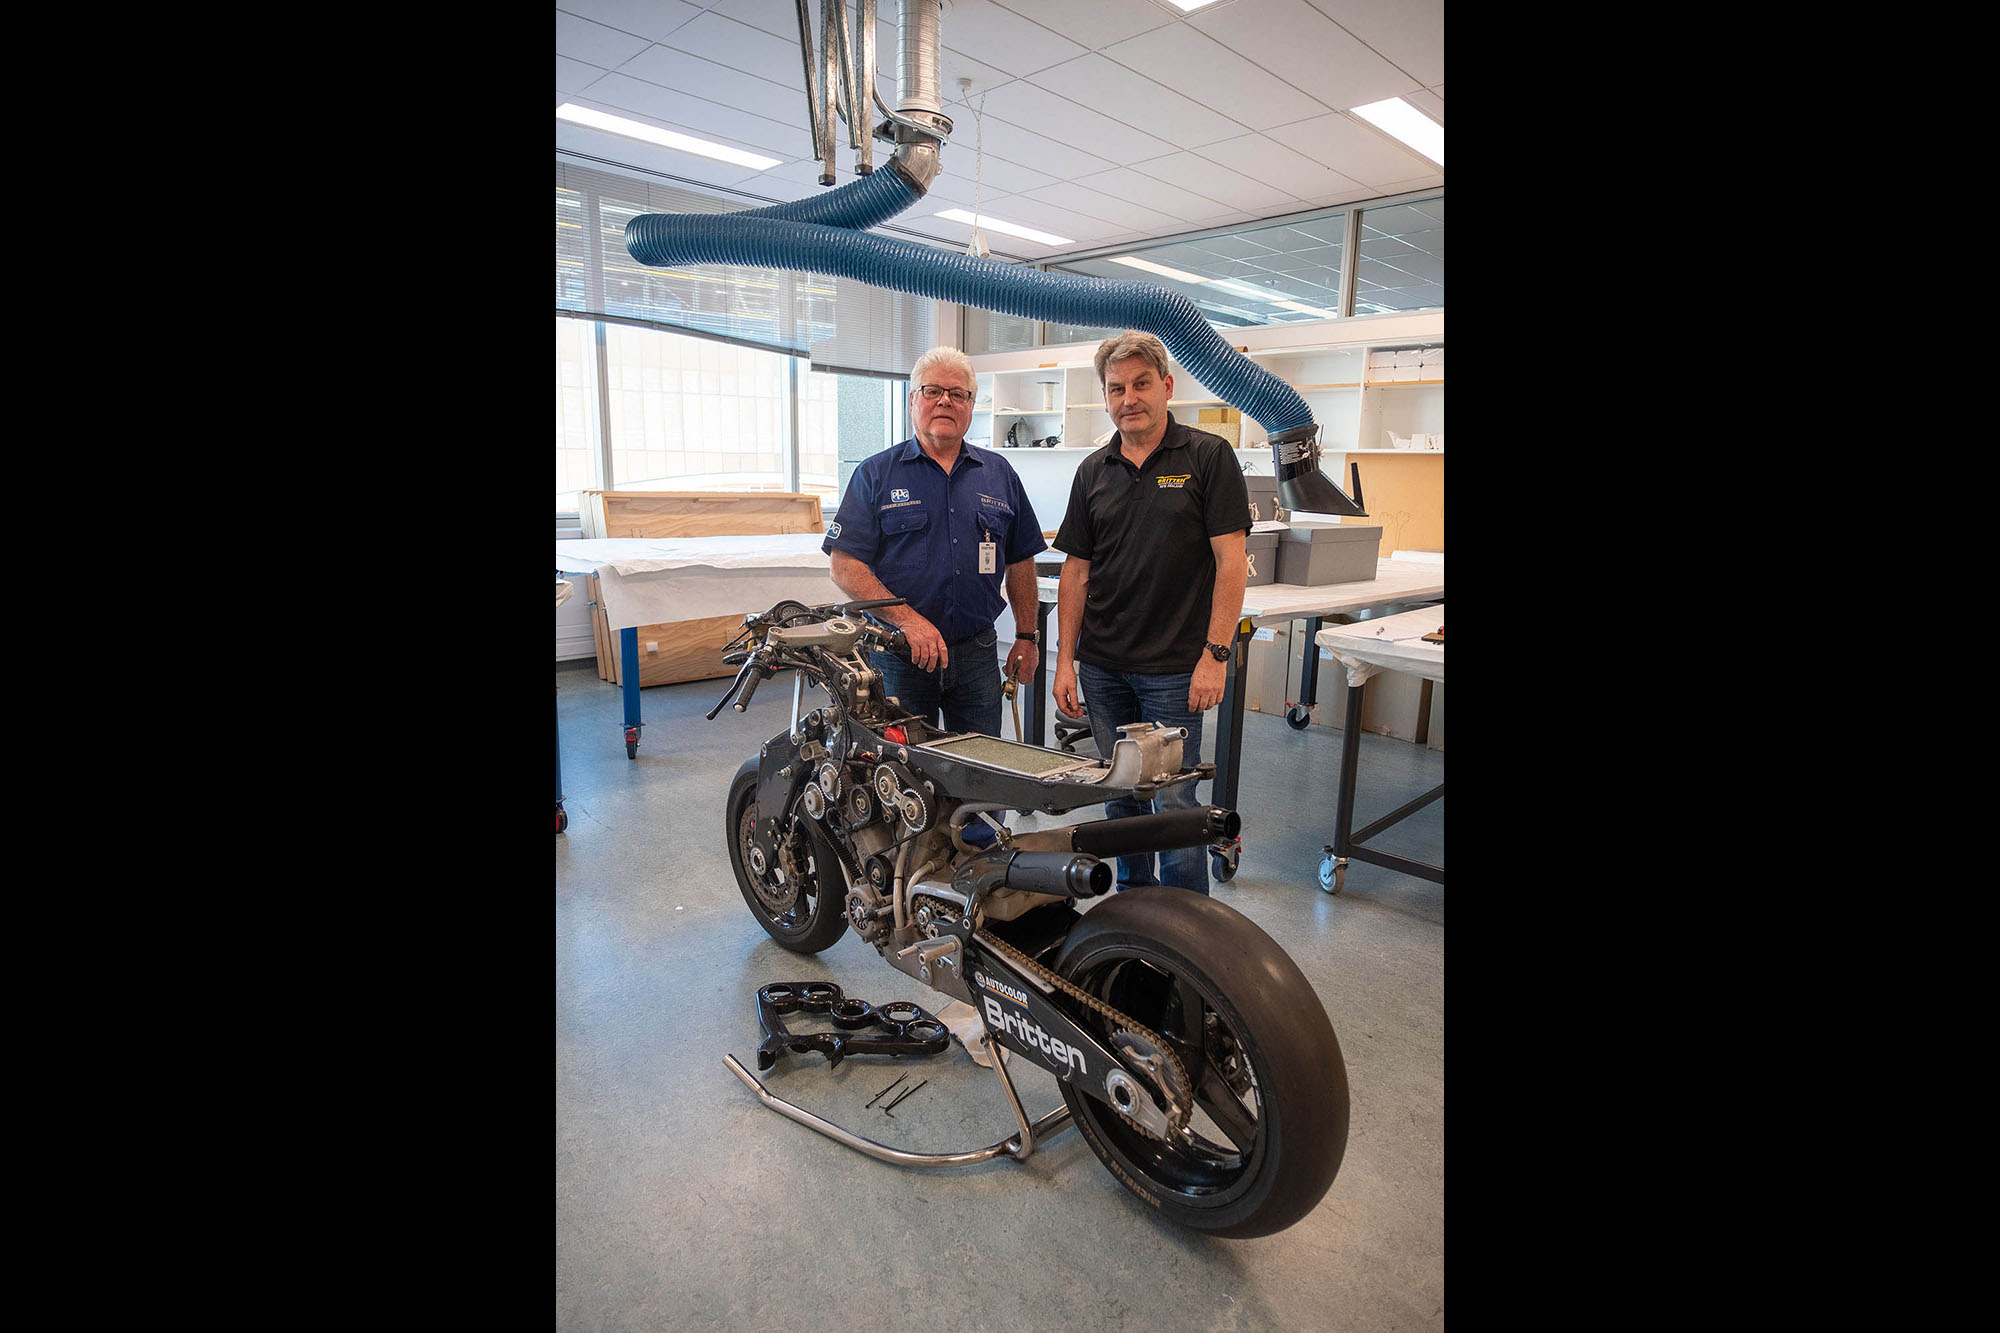 Craig and Bob stand with the Britten Bike in Te Papa’s Conservation Lab